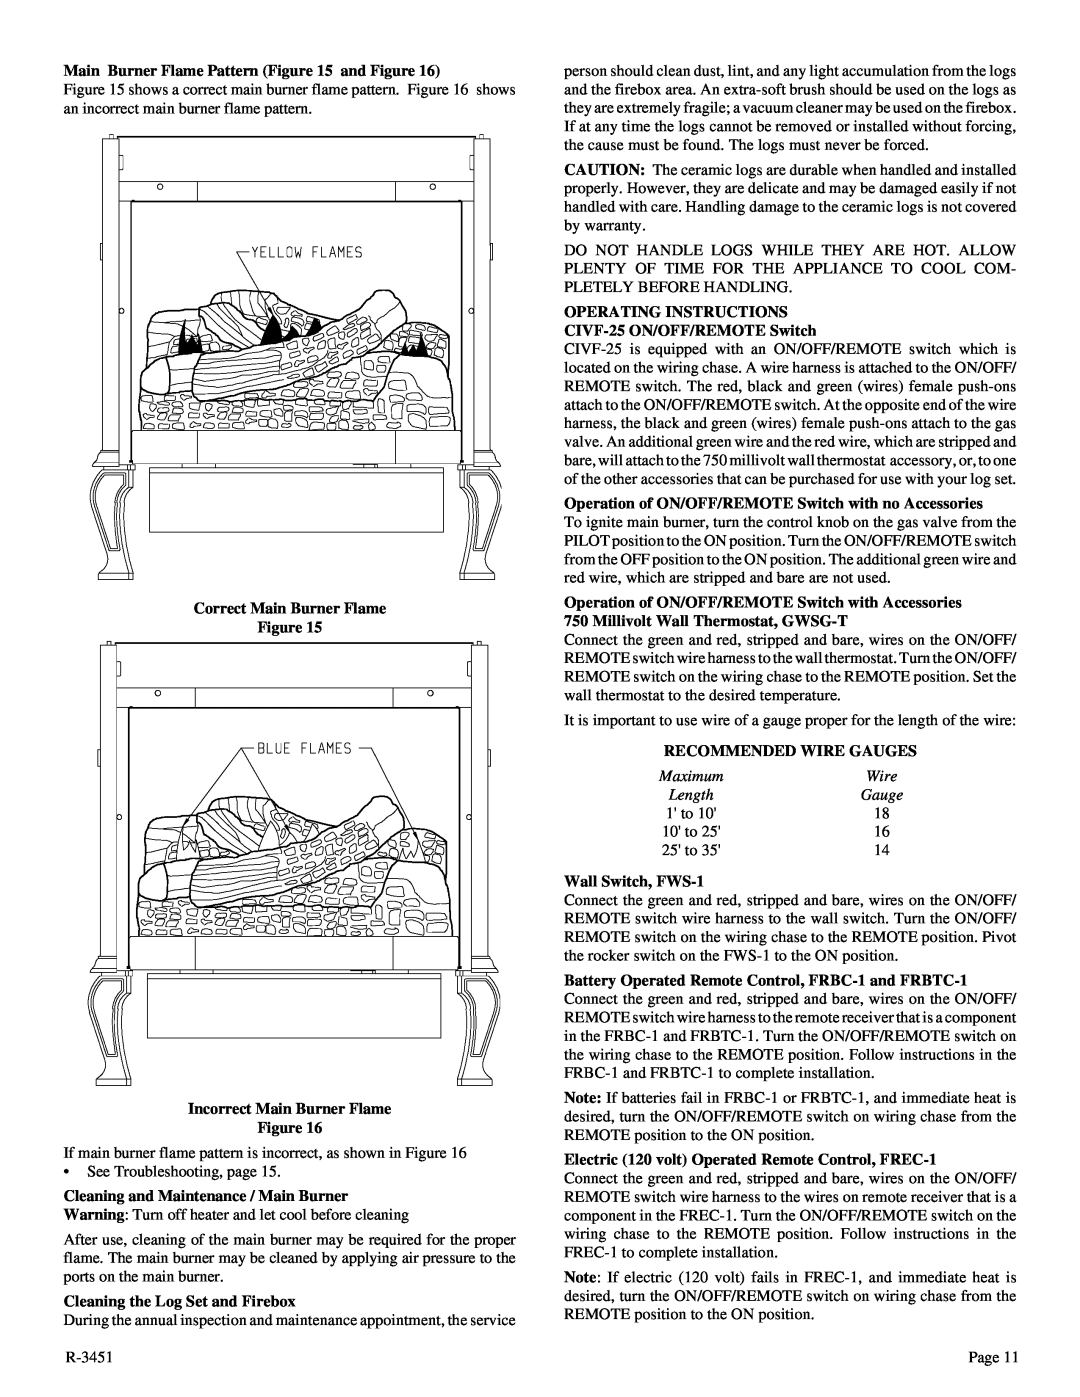 Empire Comfort Systems CIVF-25-2 installation instructions Maximum, Wire, Length, Gauge, 1 to, 10 to, 25 to 